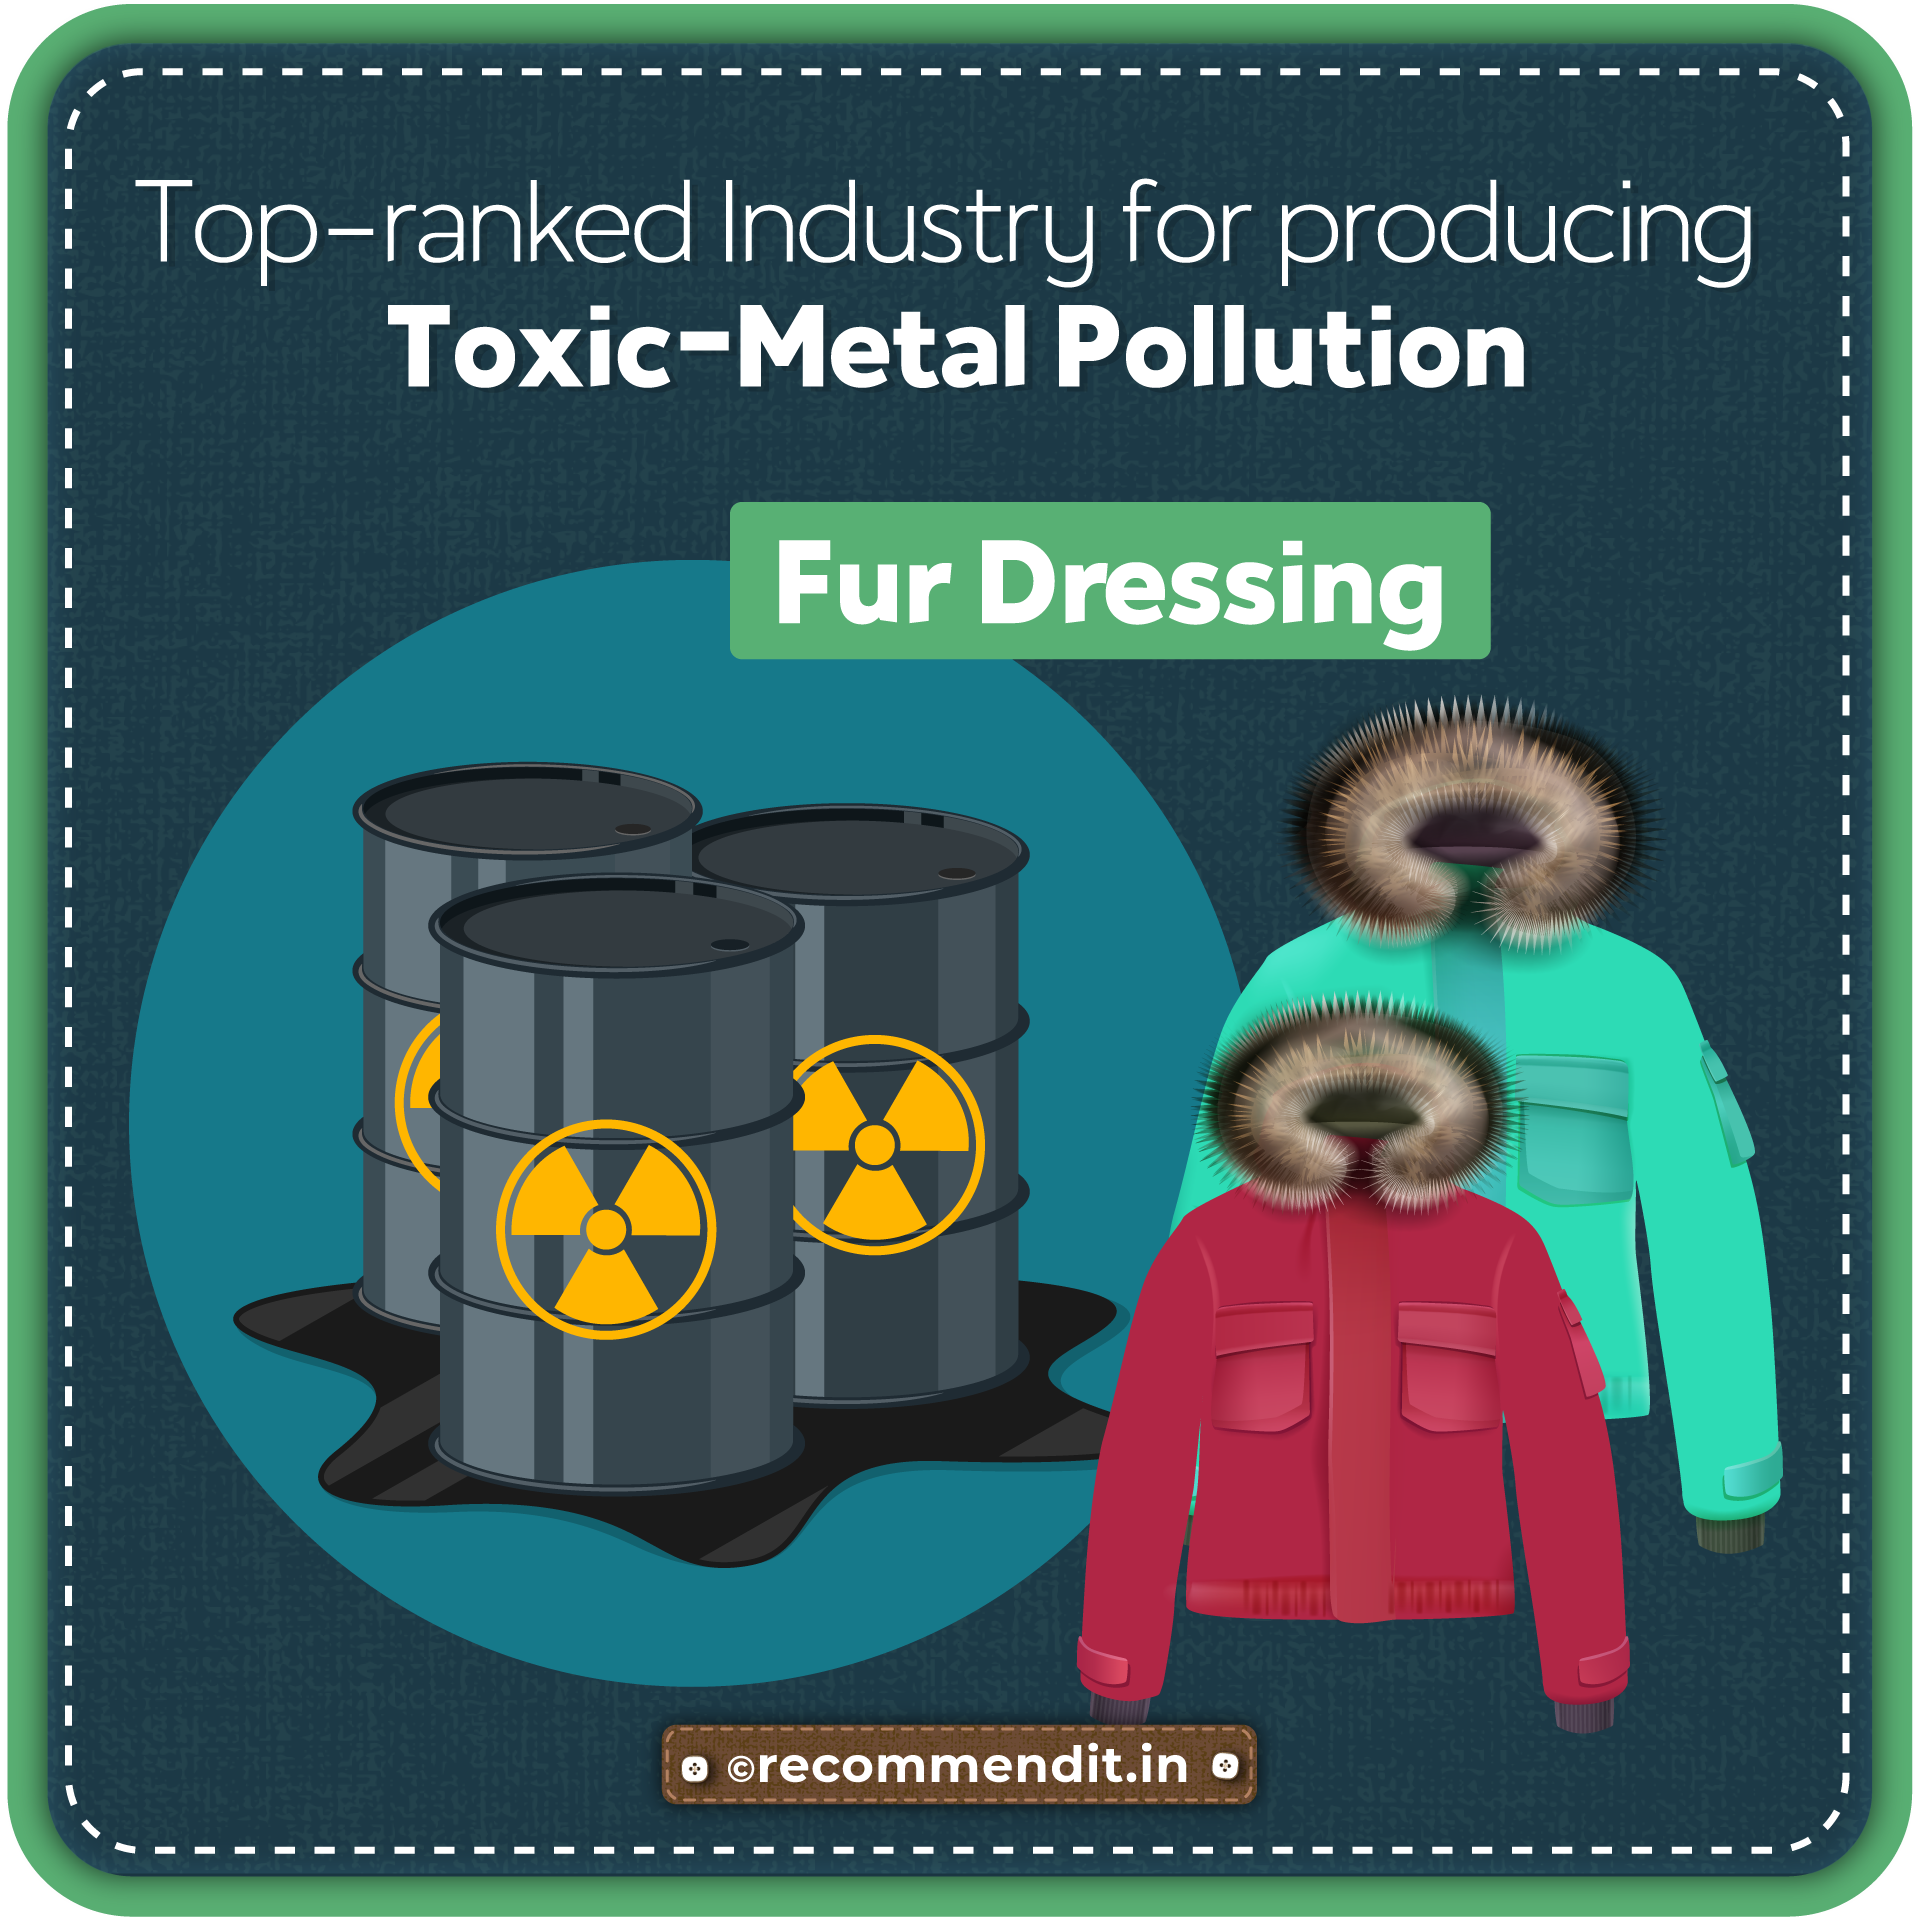 Top ranked industry for producing toxic-metal pollution